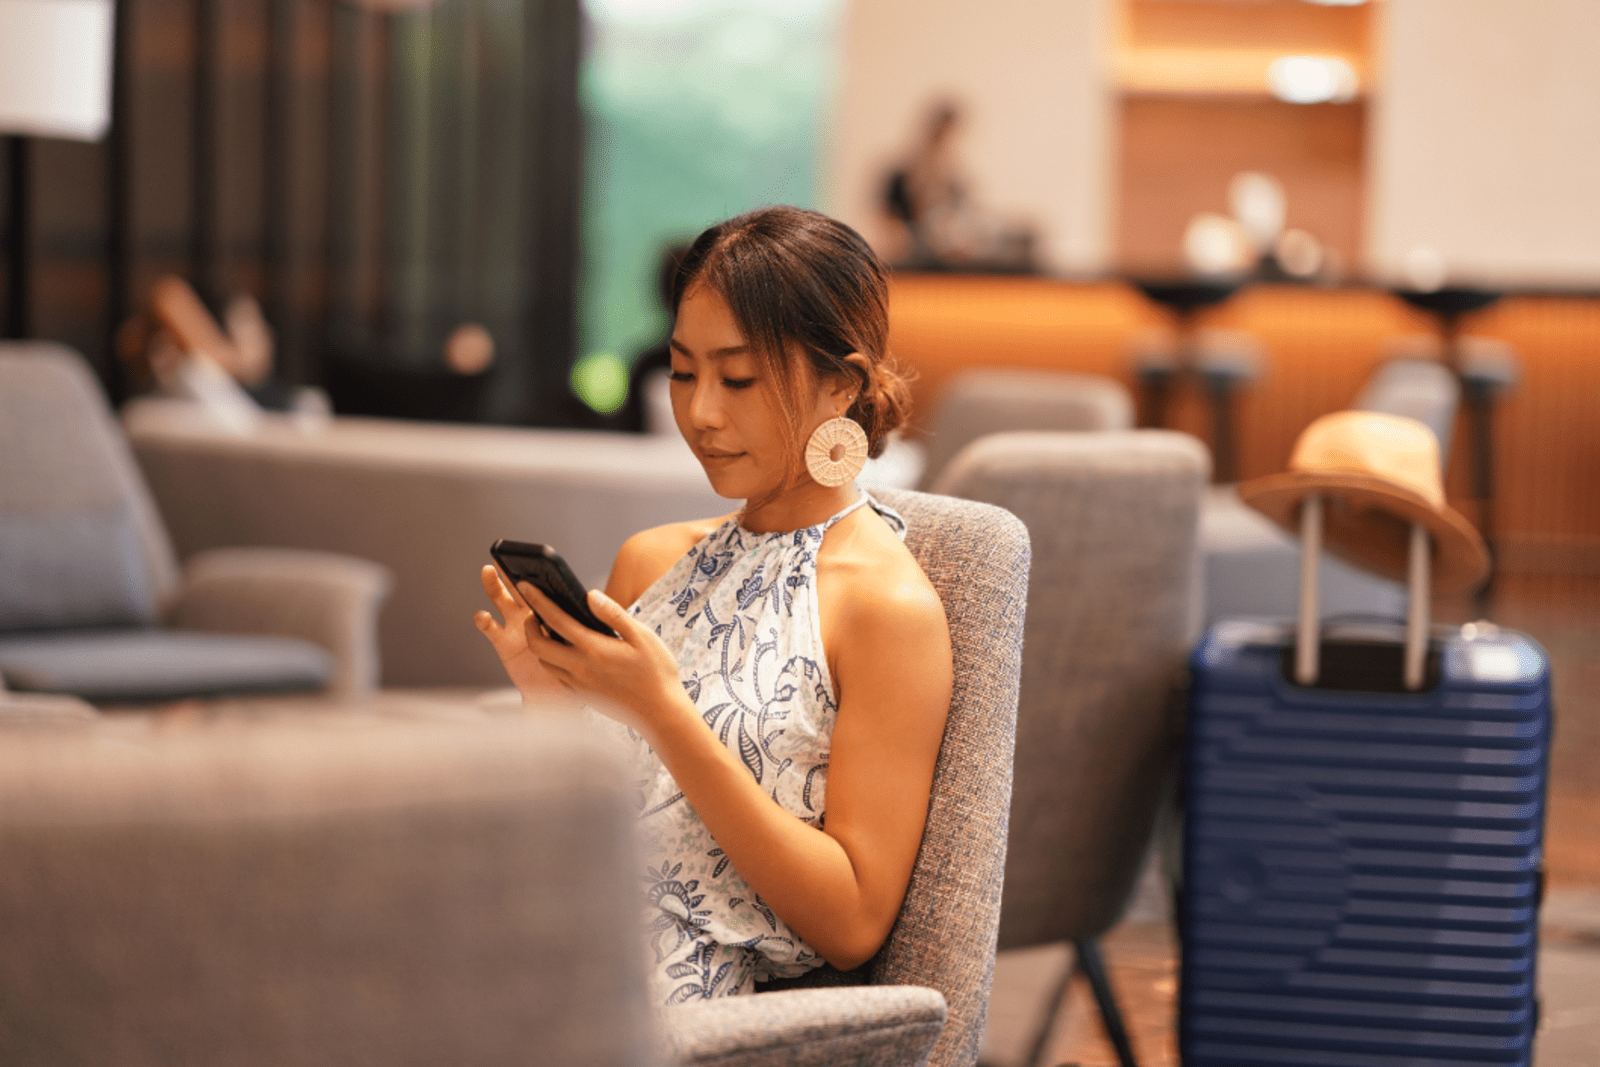 Woman relaxing in an airport lounge